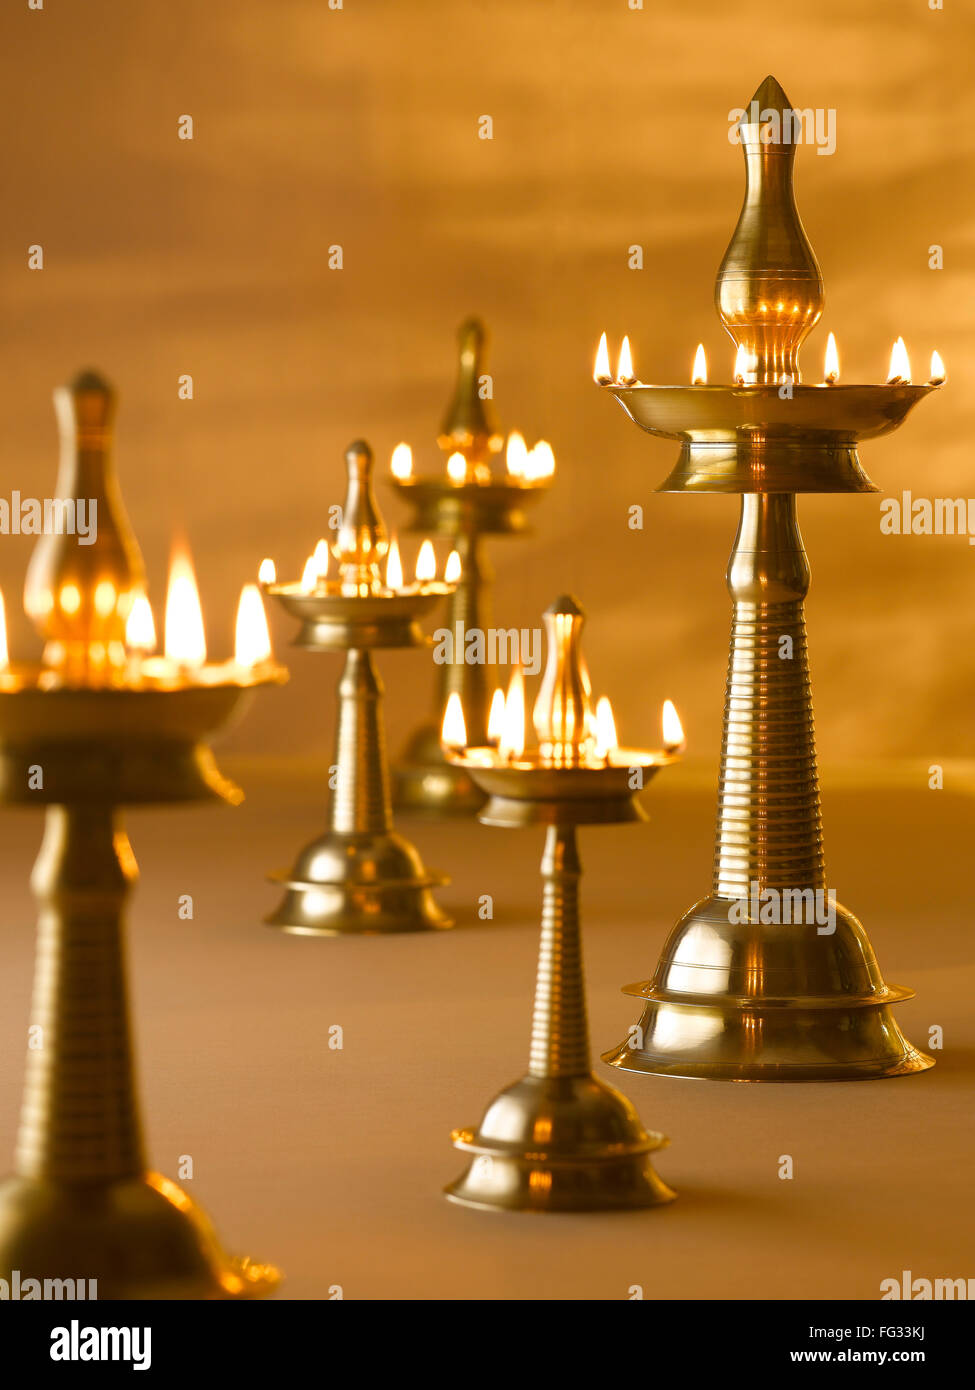 Brass lamps decoration during diwali festival ; India Stock Photo